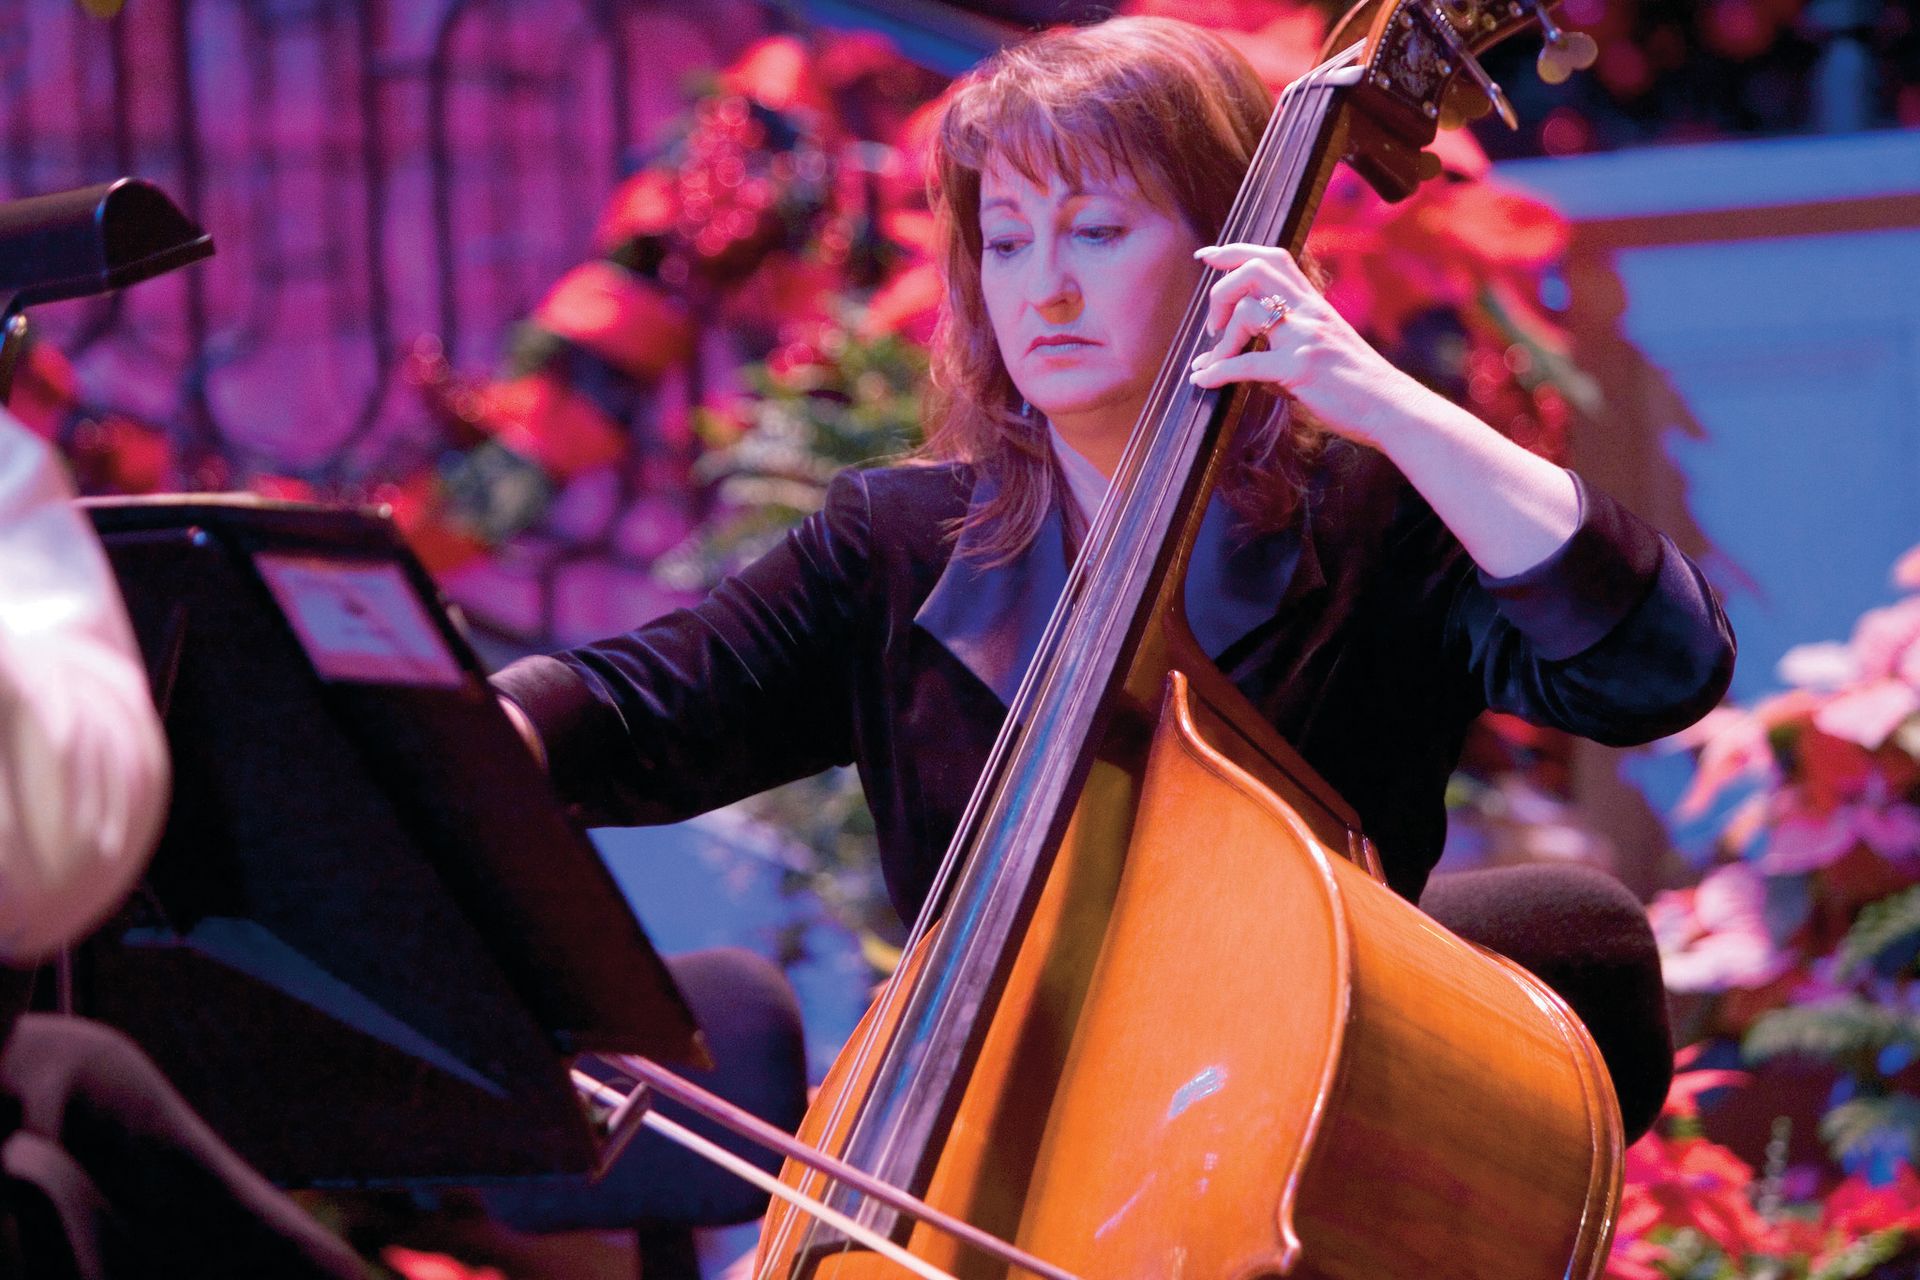 A member of the Orchestra at Temple Square plays a double bass during a Christmas concert.